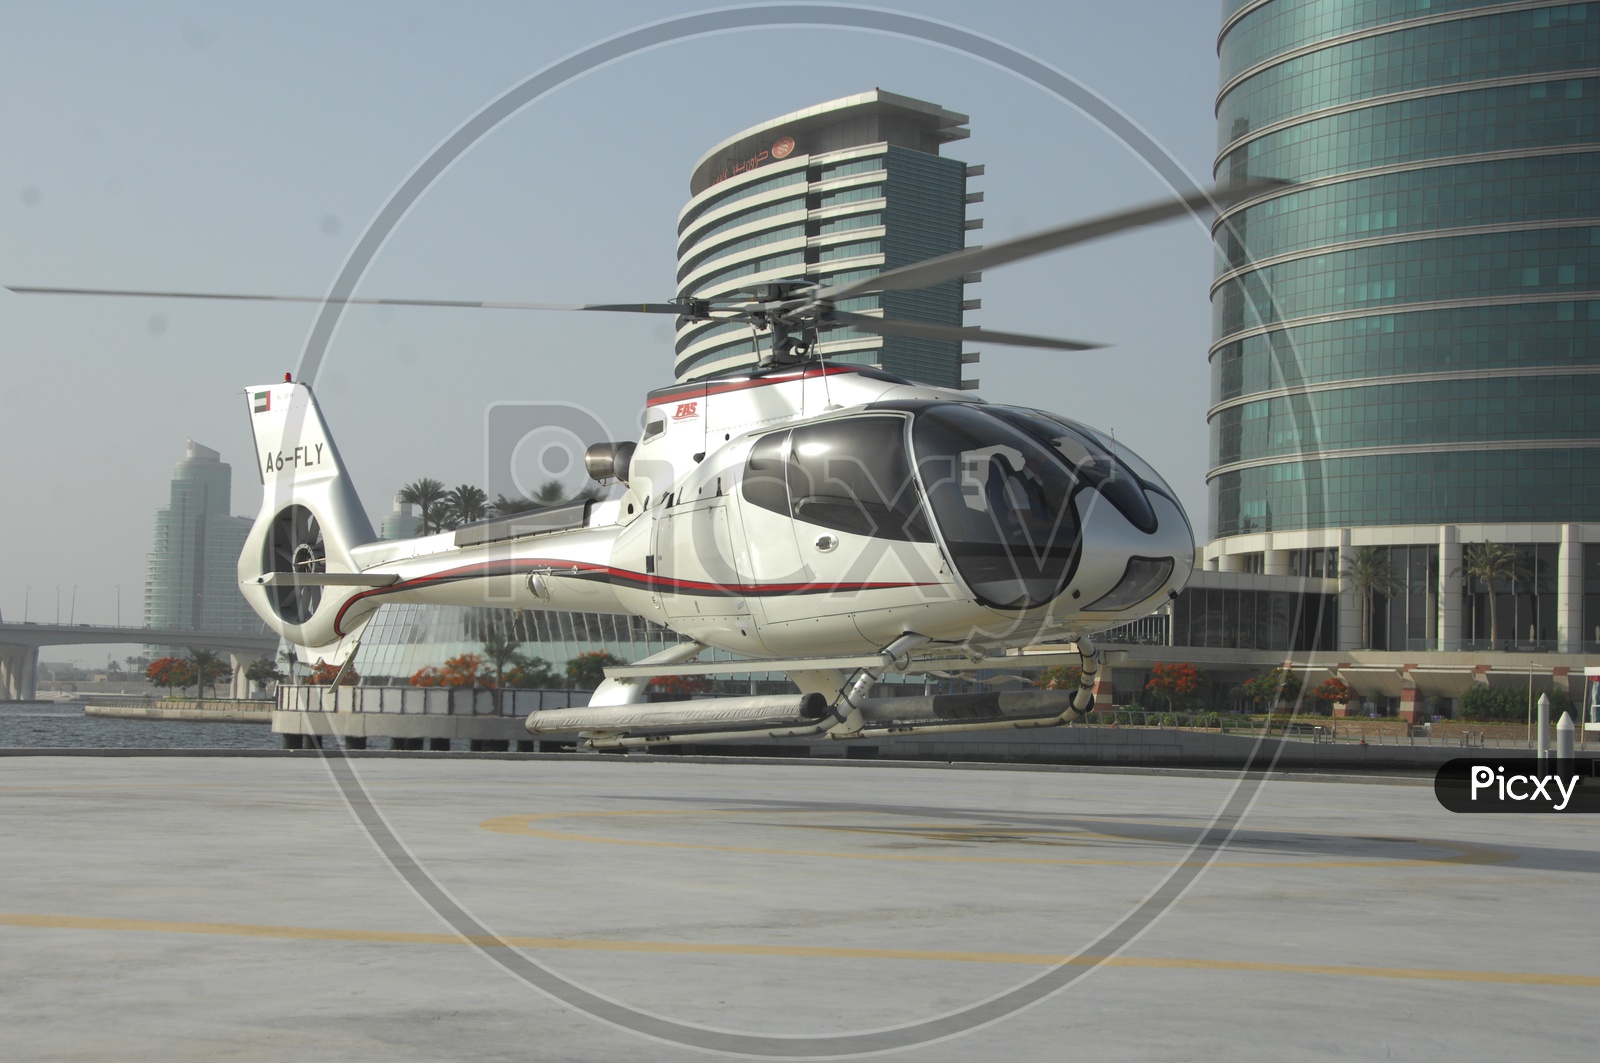 Helicopter/Aircraft on the building - Movie stills